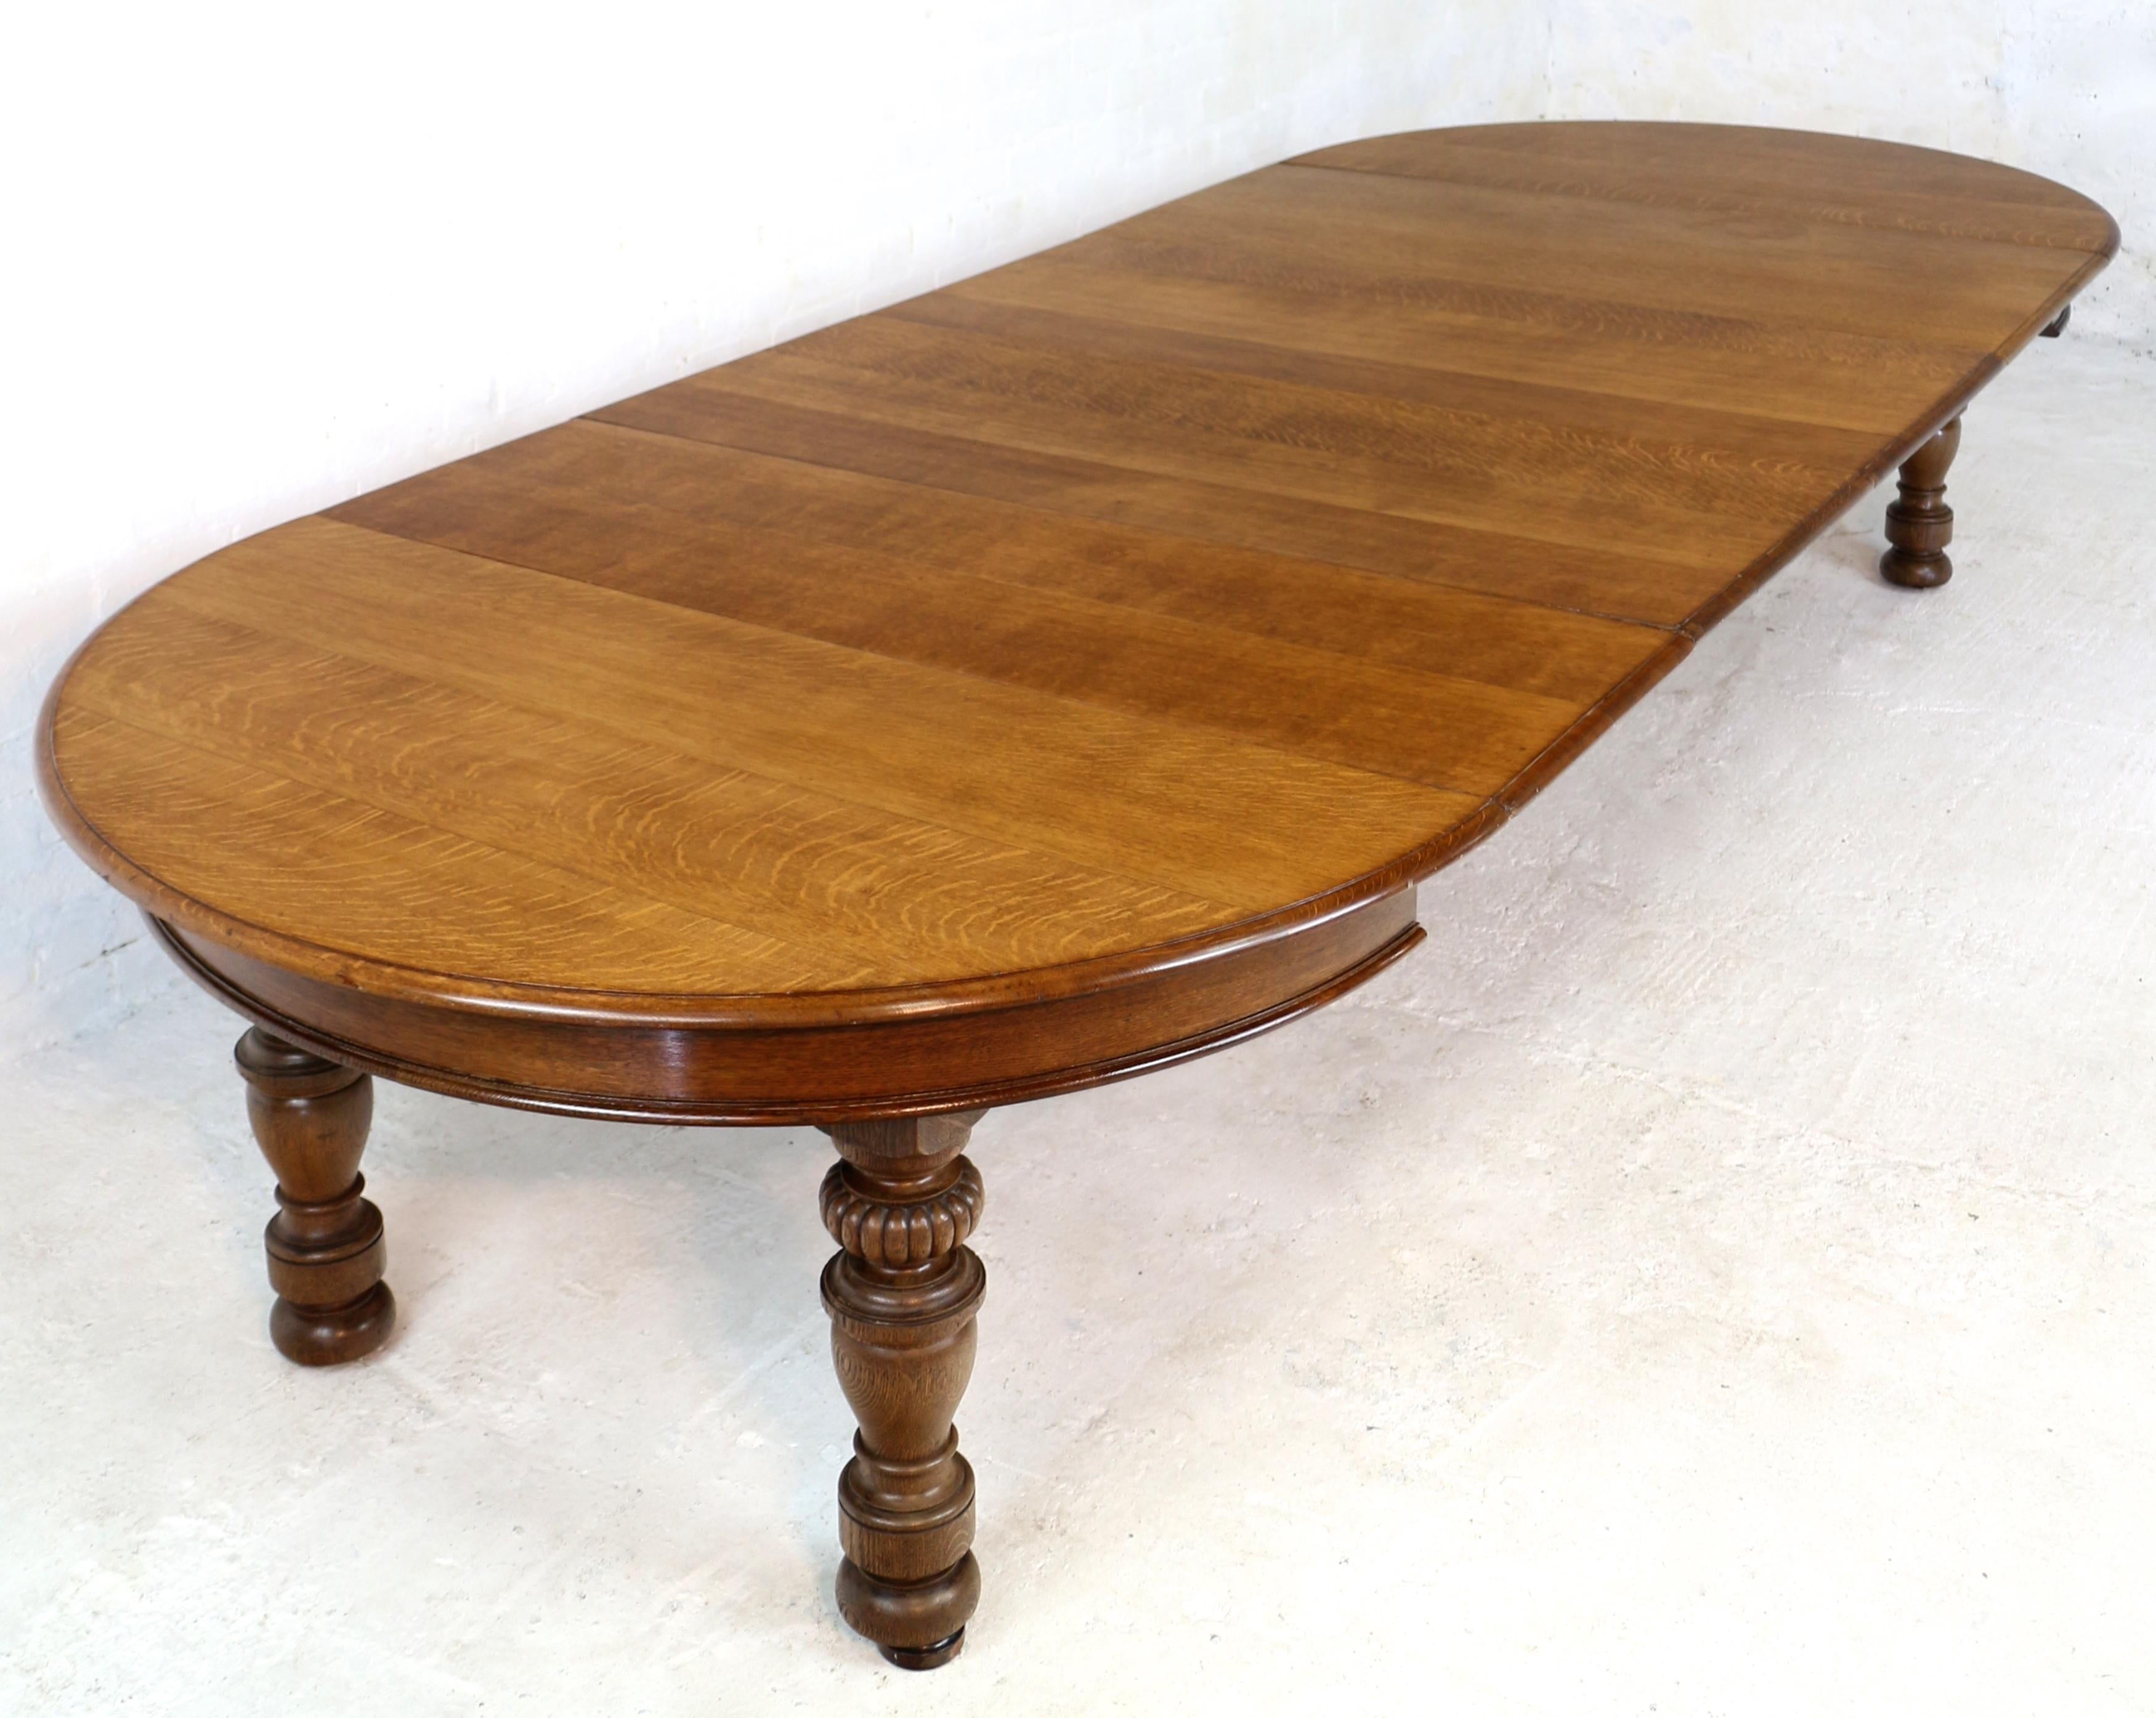 A substantial and extremely well made antique Victorian extending circular dining table made by Gillows of Lancaster. In quarter-sawn oak and with four leaves, this large 5ft round table extends by means of two runner systems to just over 12ft 6